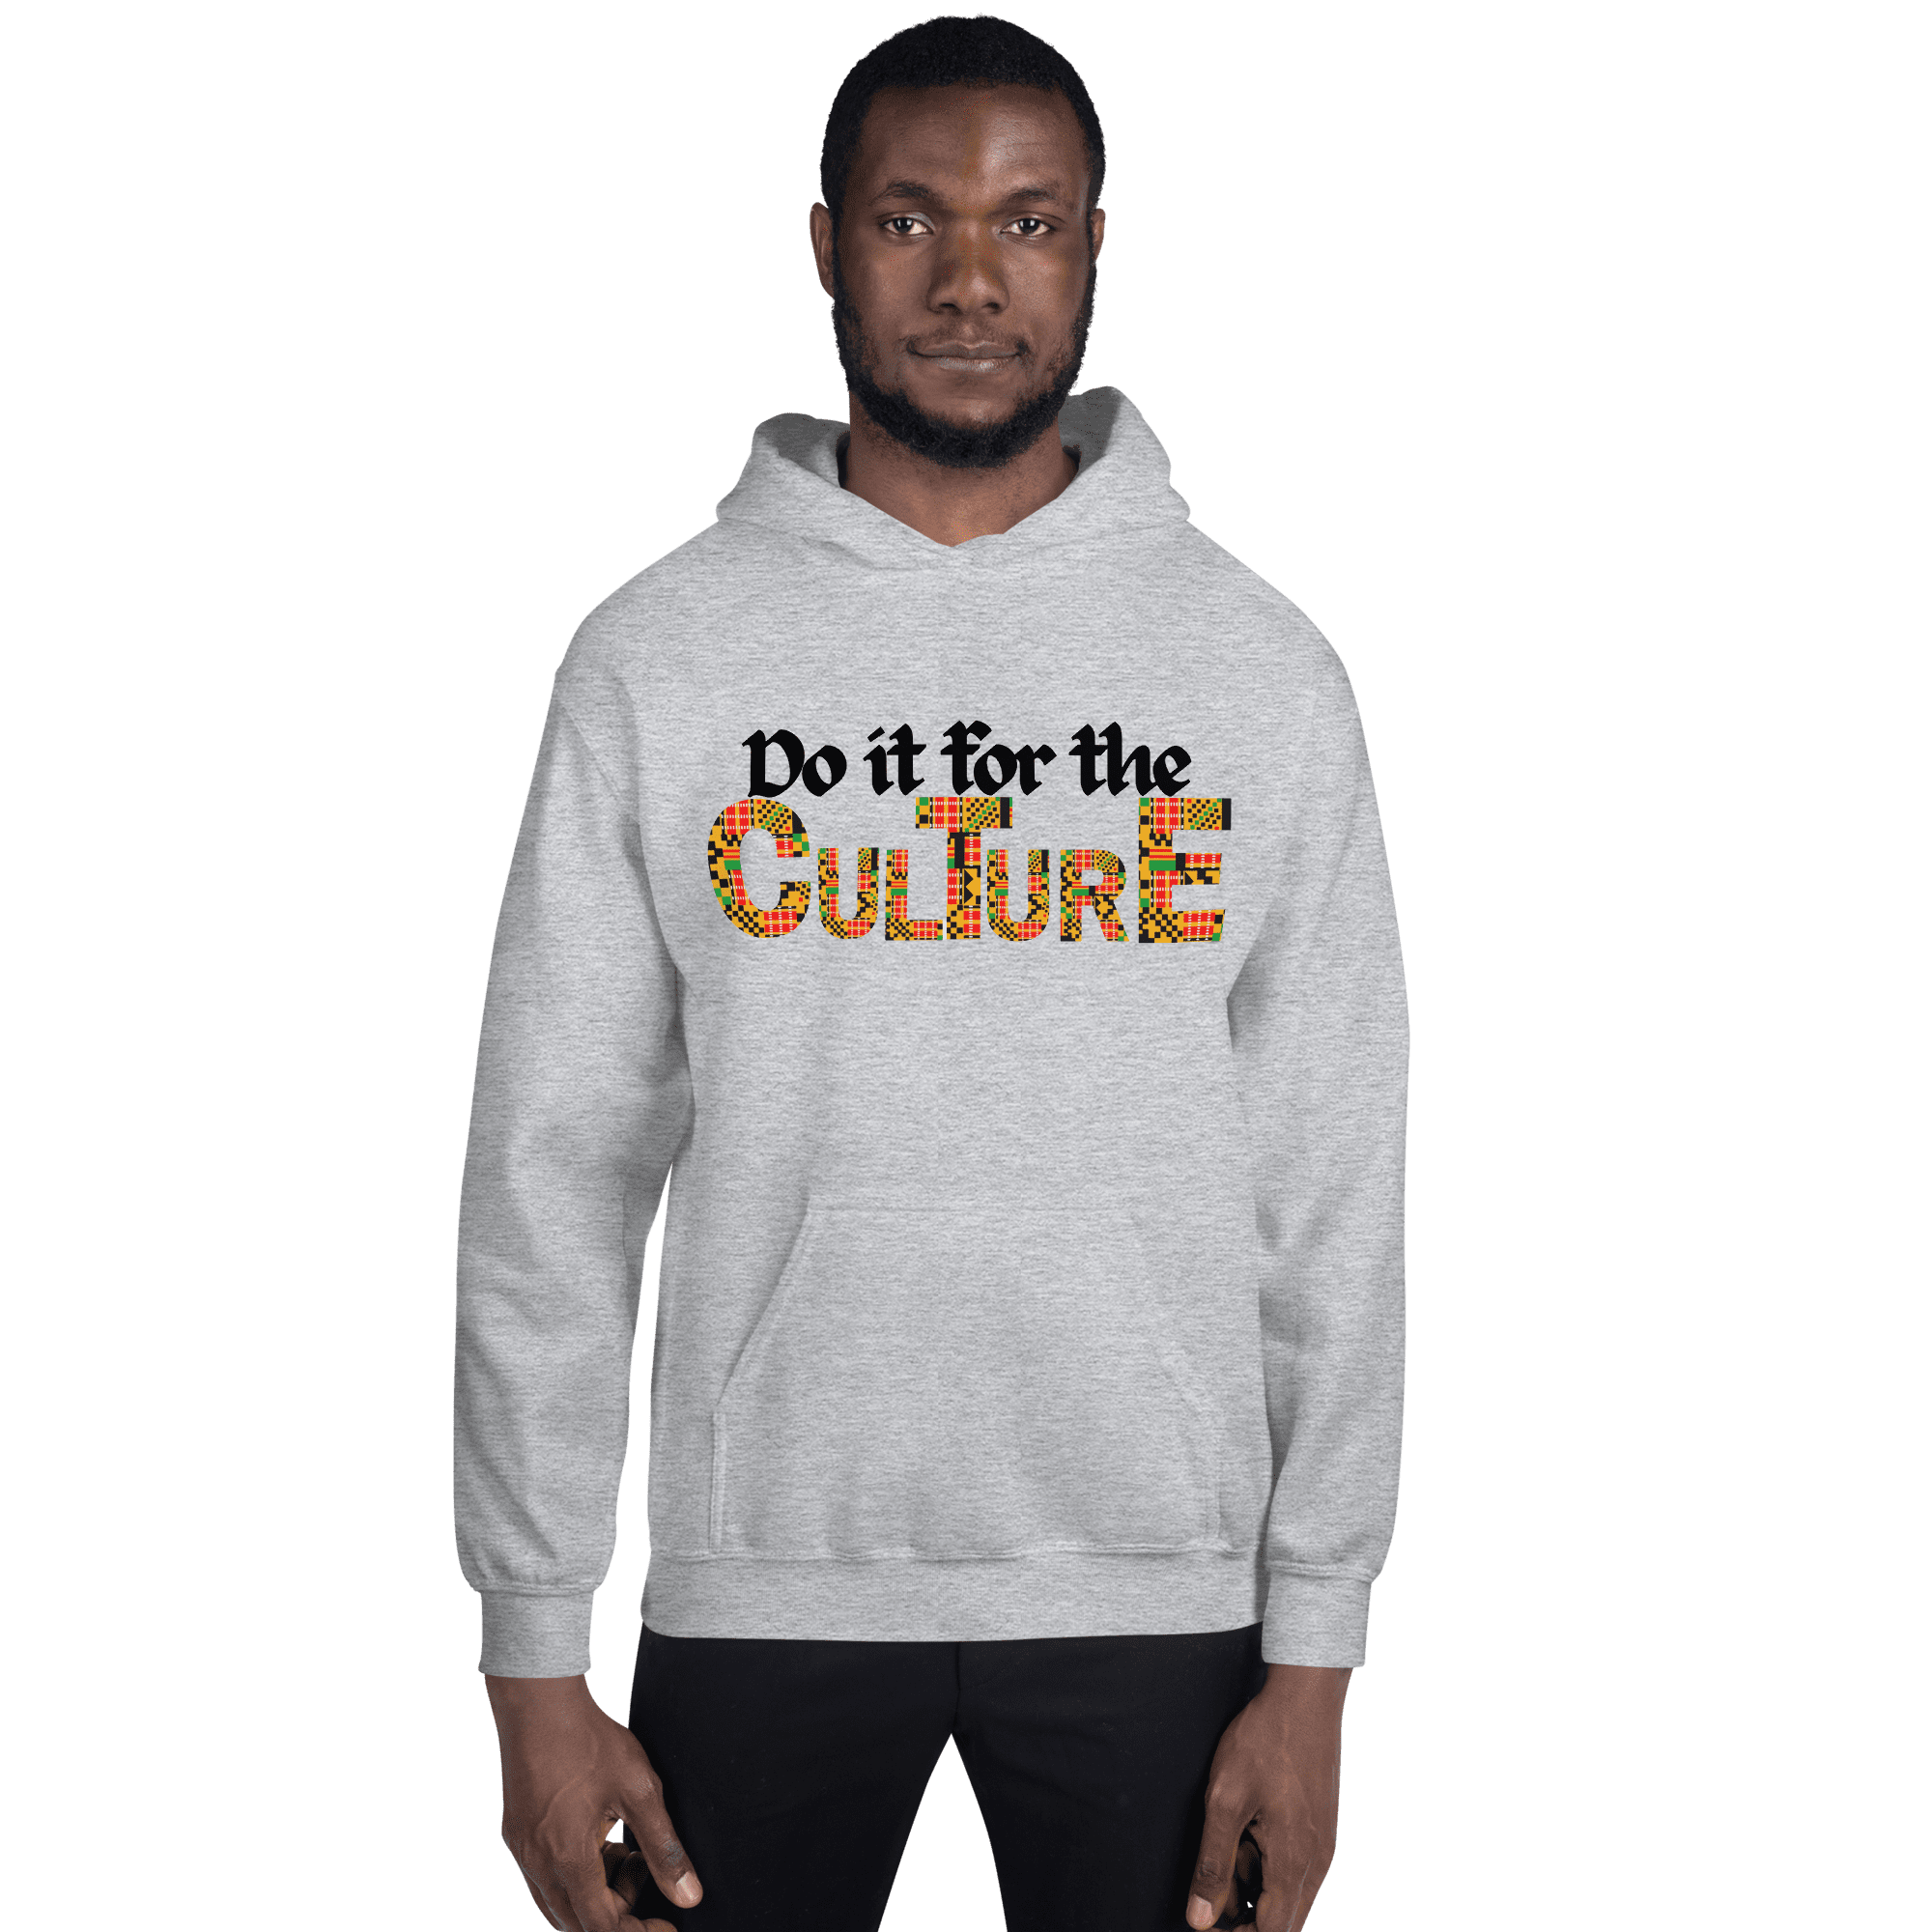 Do it for the Culture Unisex Hoodie